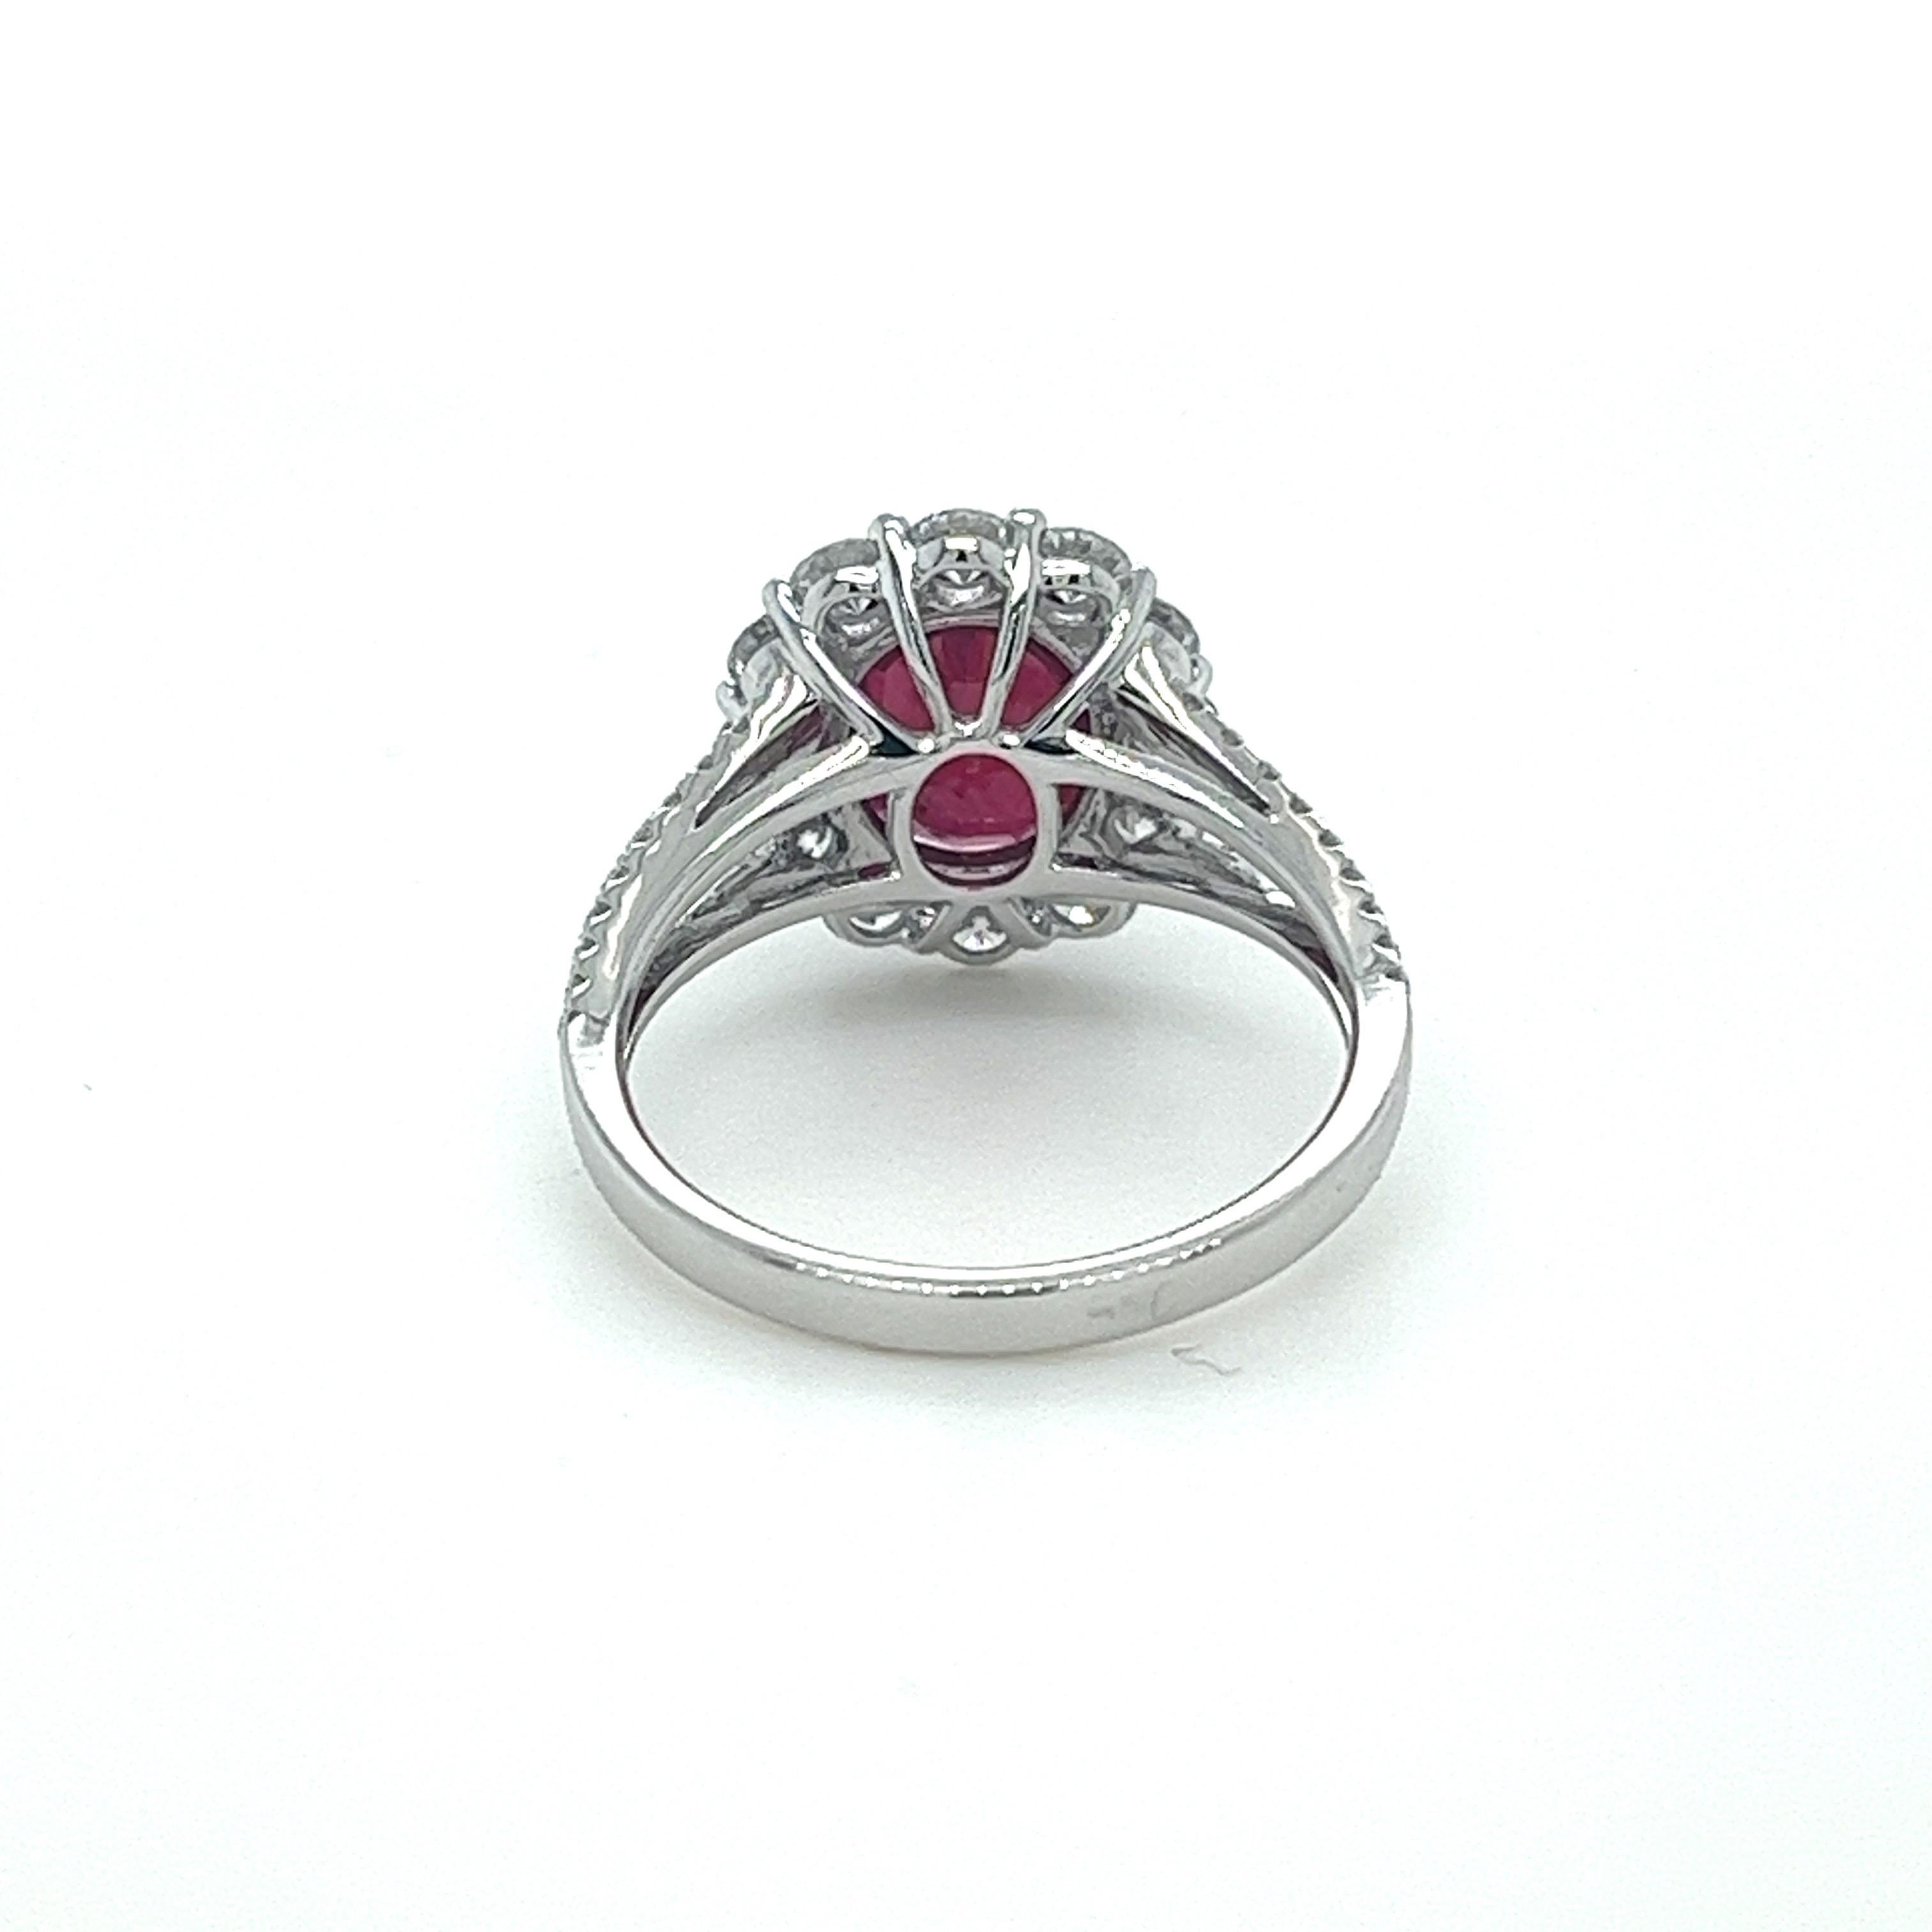 GIA Certified 3.01 Carat Oval Ruby & Diamond Ring in 18 Karat White Gold In New Condition For Sale In Great Neck, NY